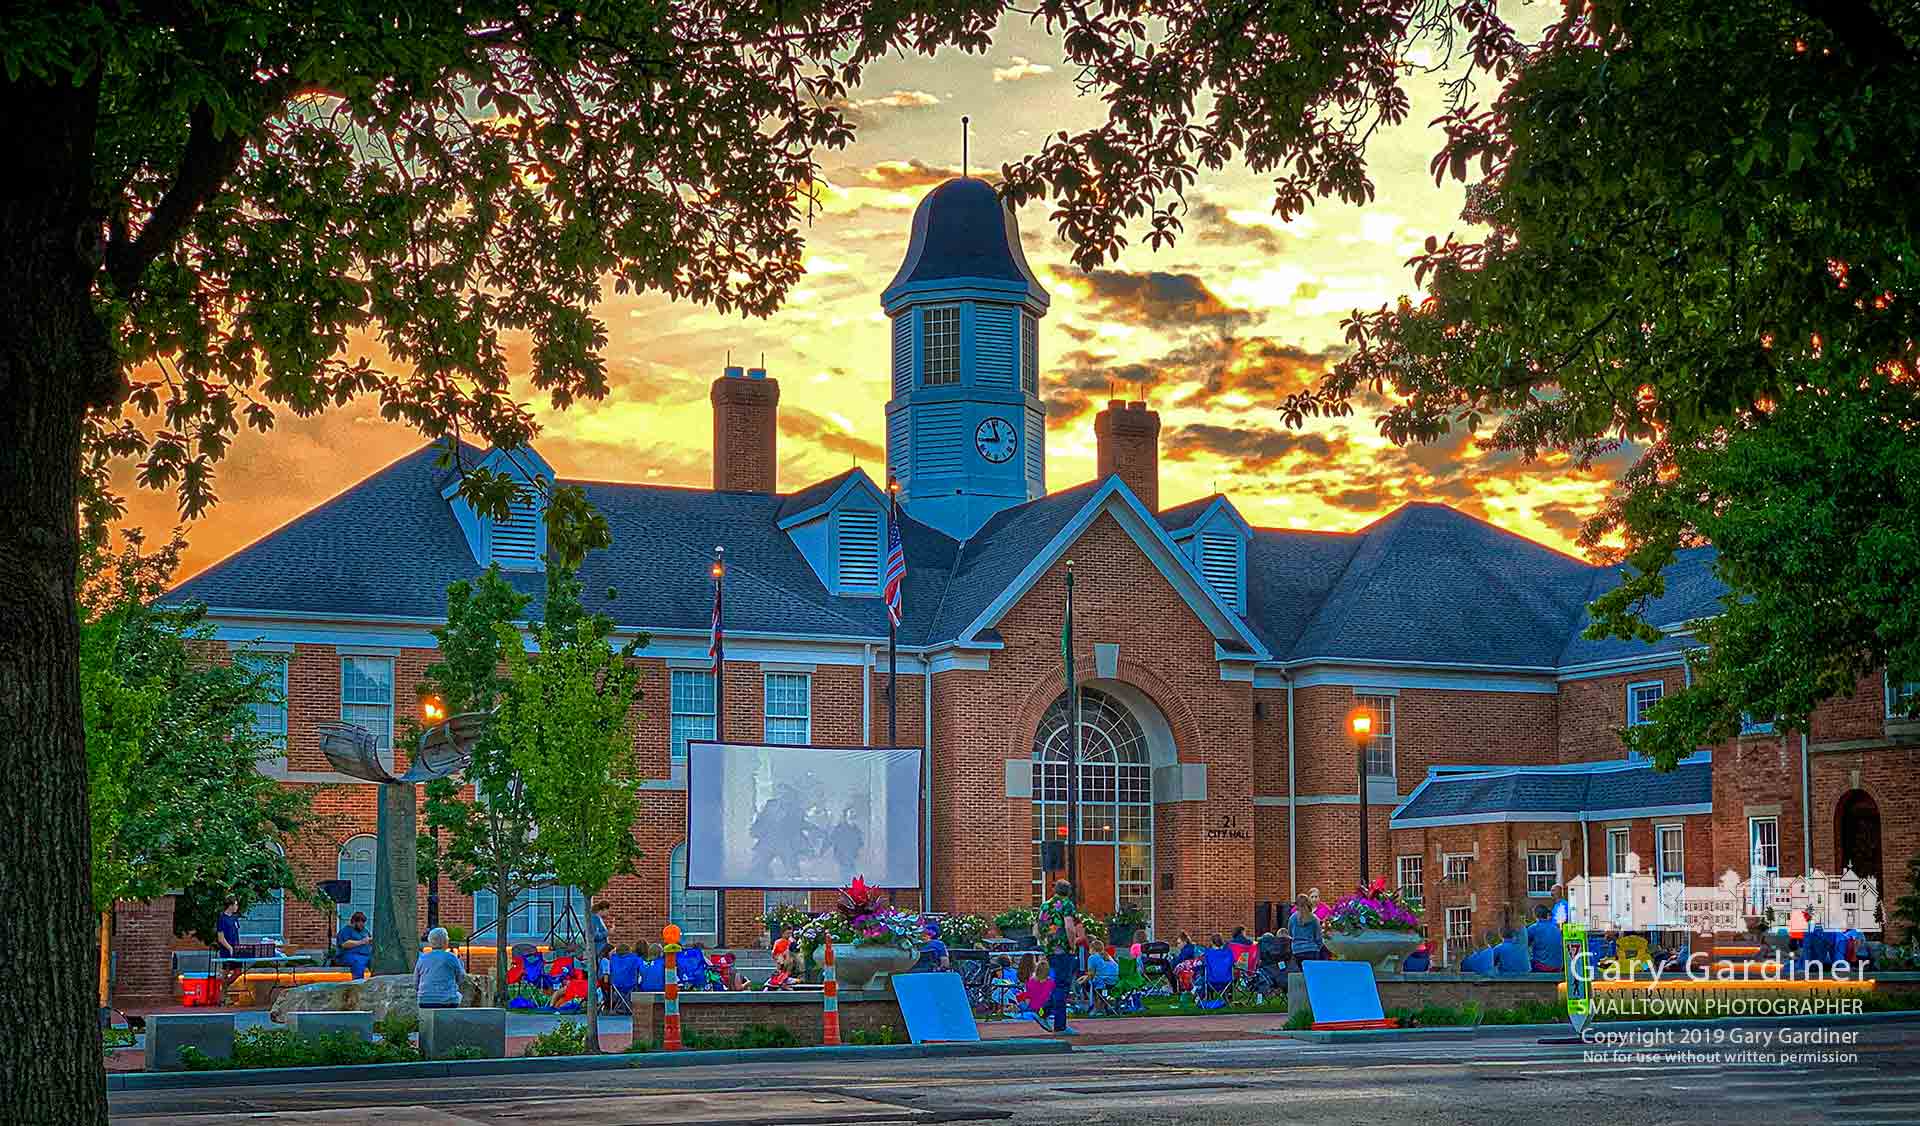 A crowd gathers on the green in front of city hall for Friday night movies on the first night of summer. My Final Photo for June 21, 2019.